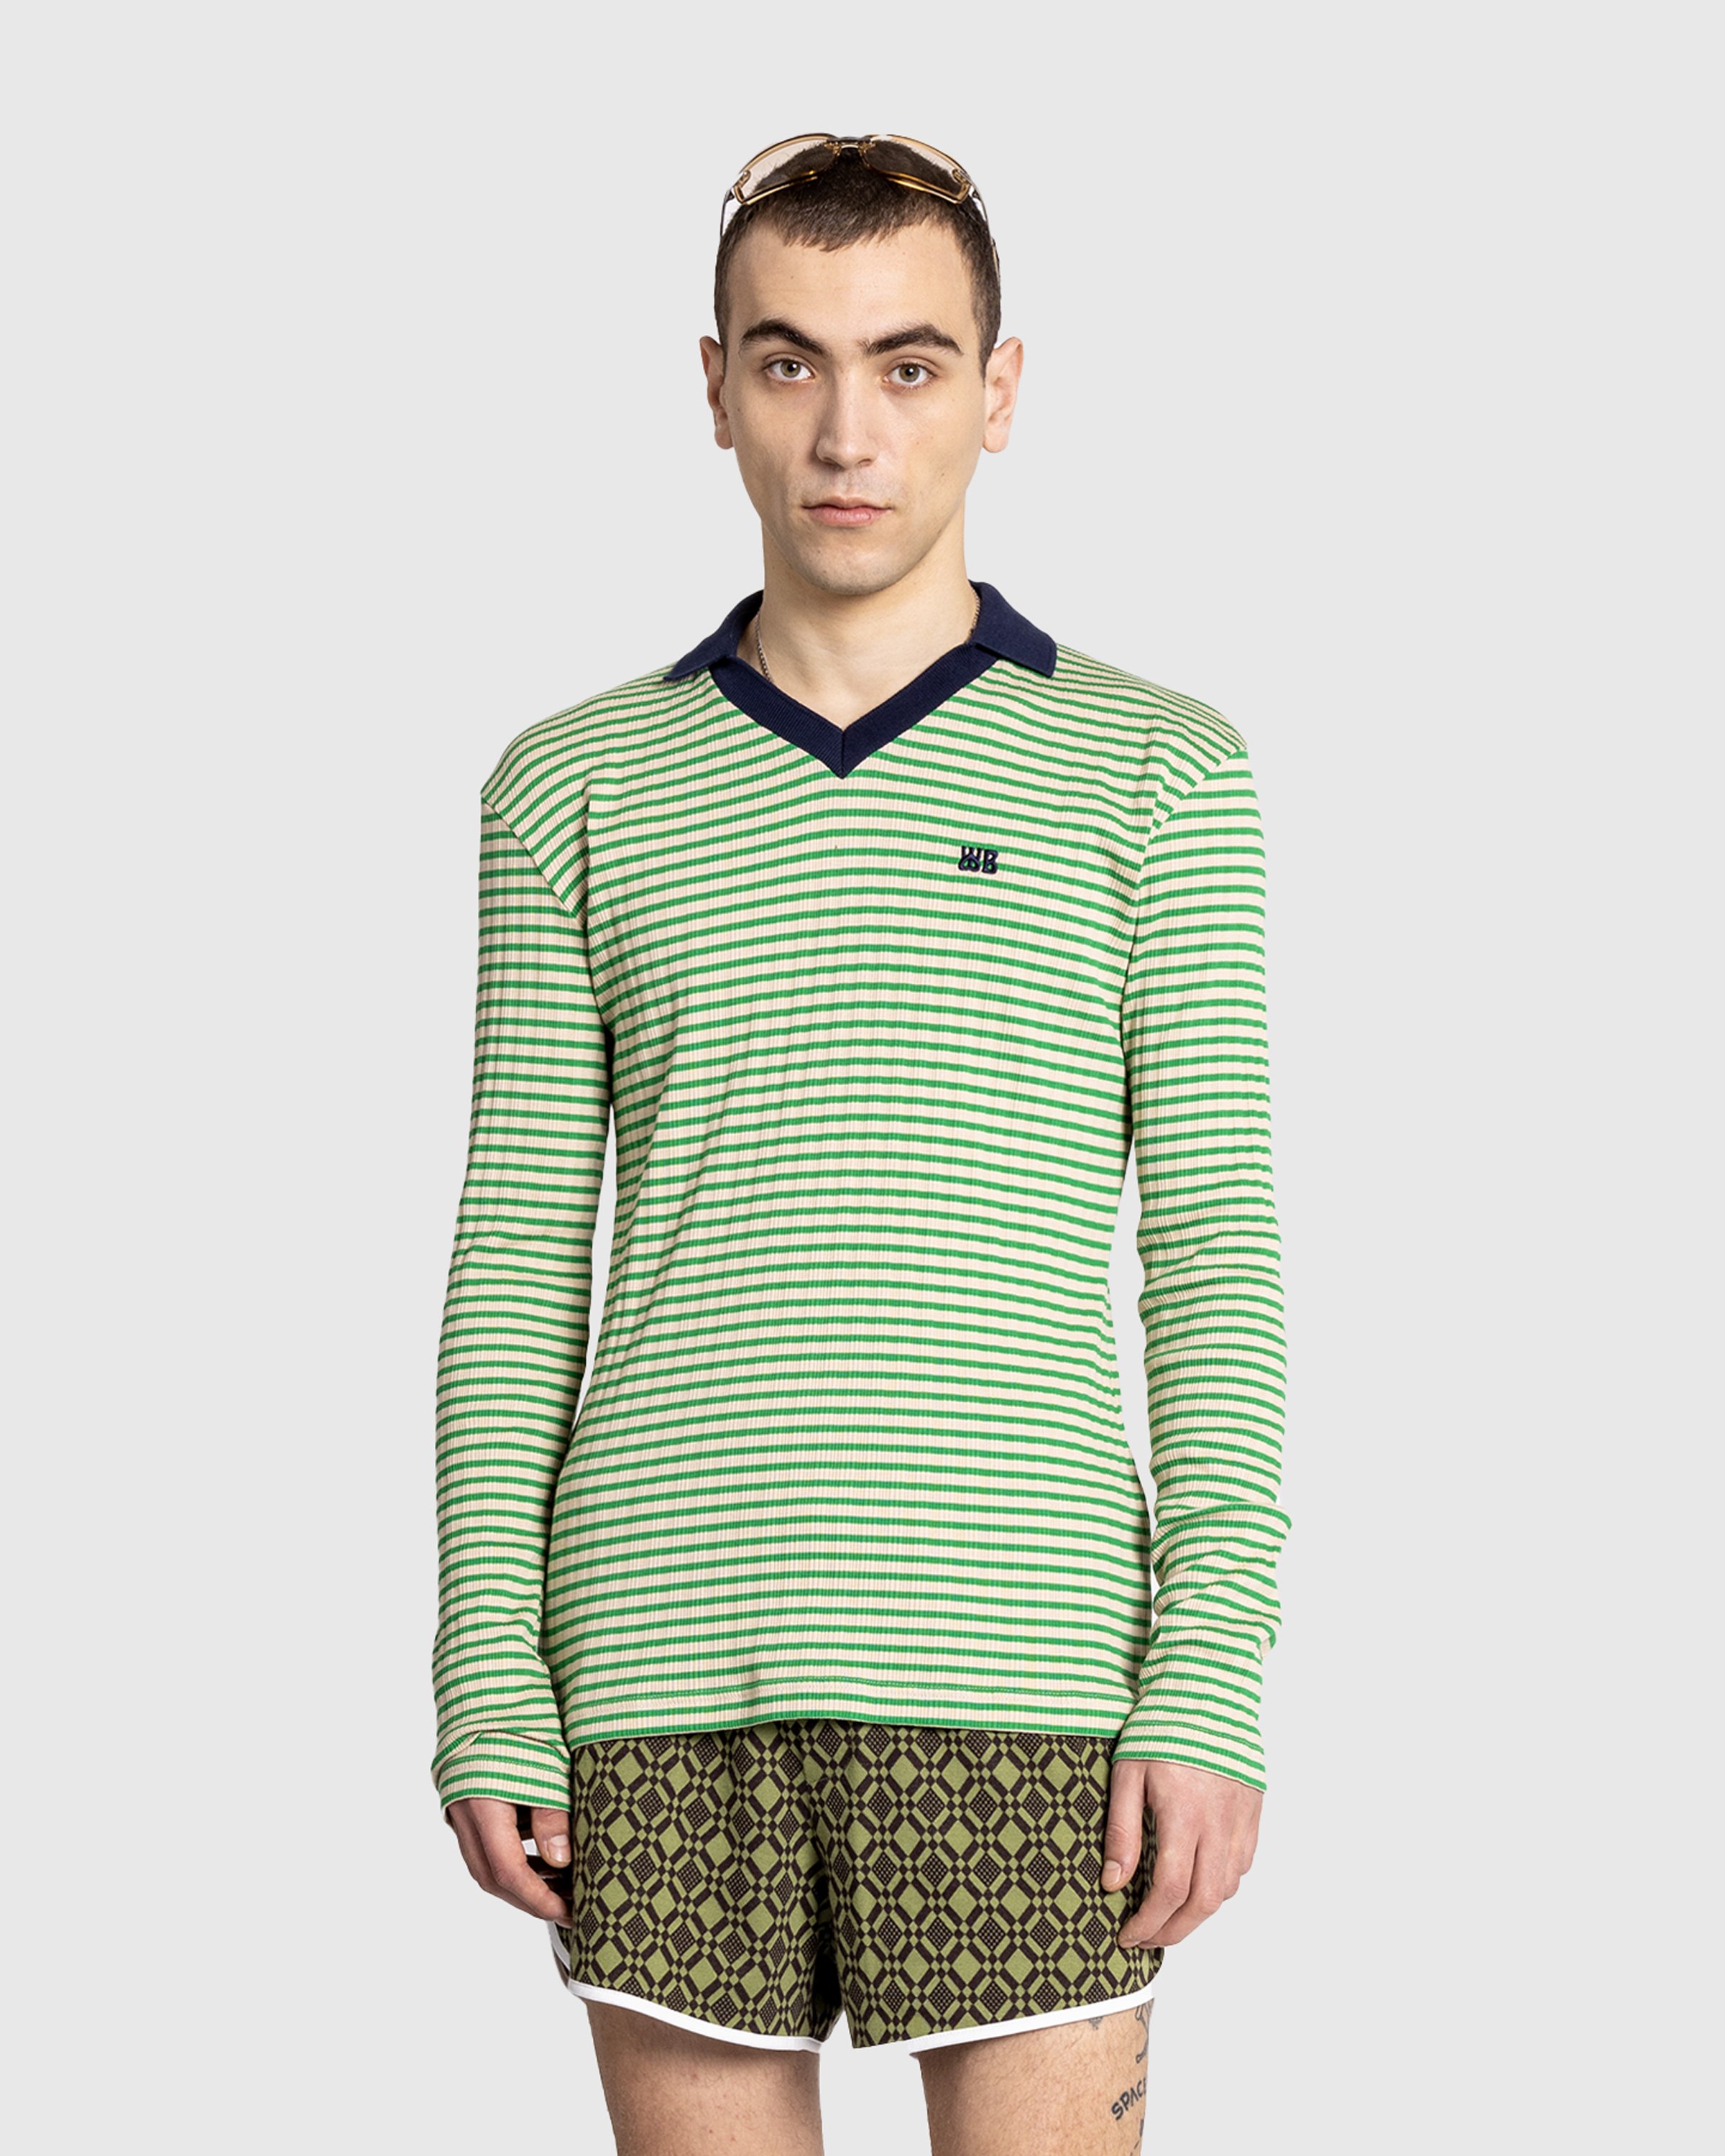 Wales Bonner - Polo Striped Green - Clothing - Green - Image 2